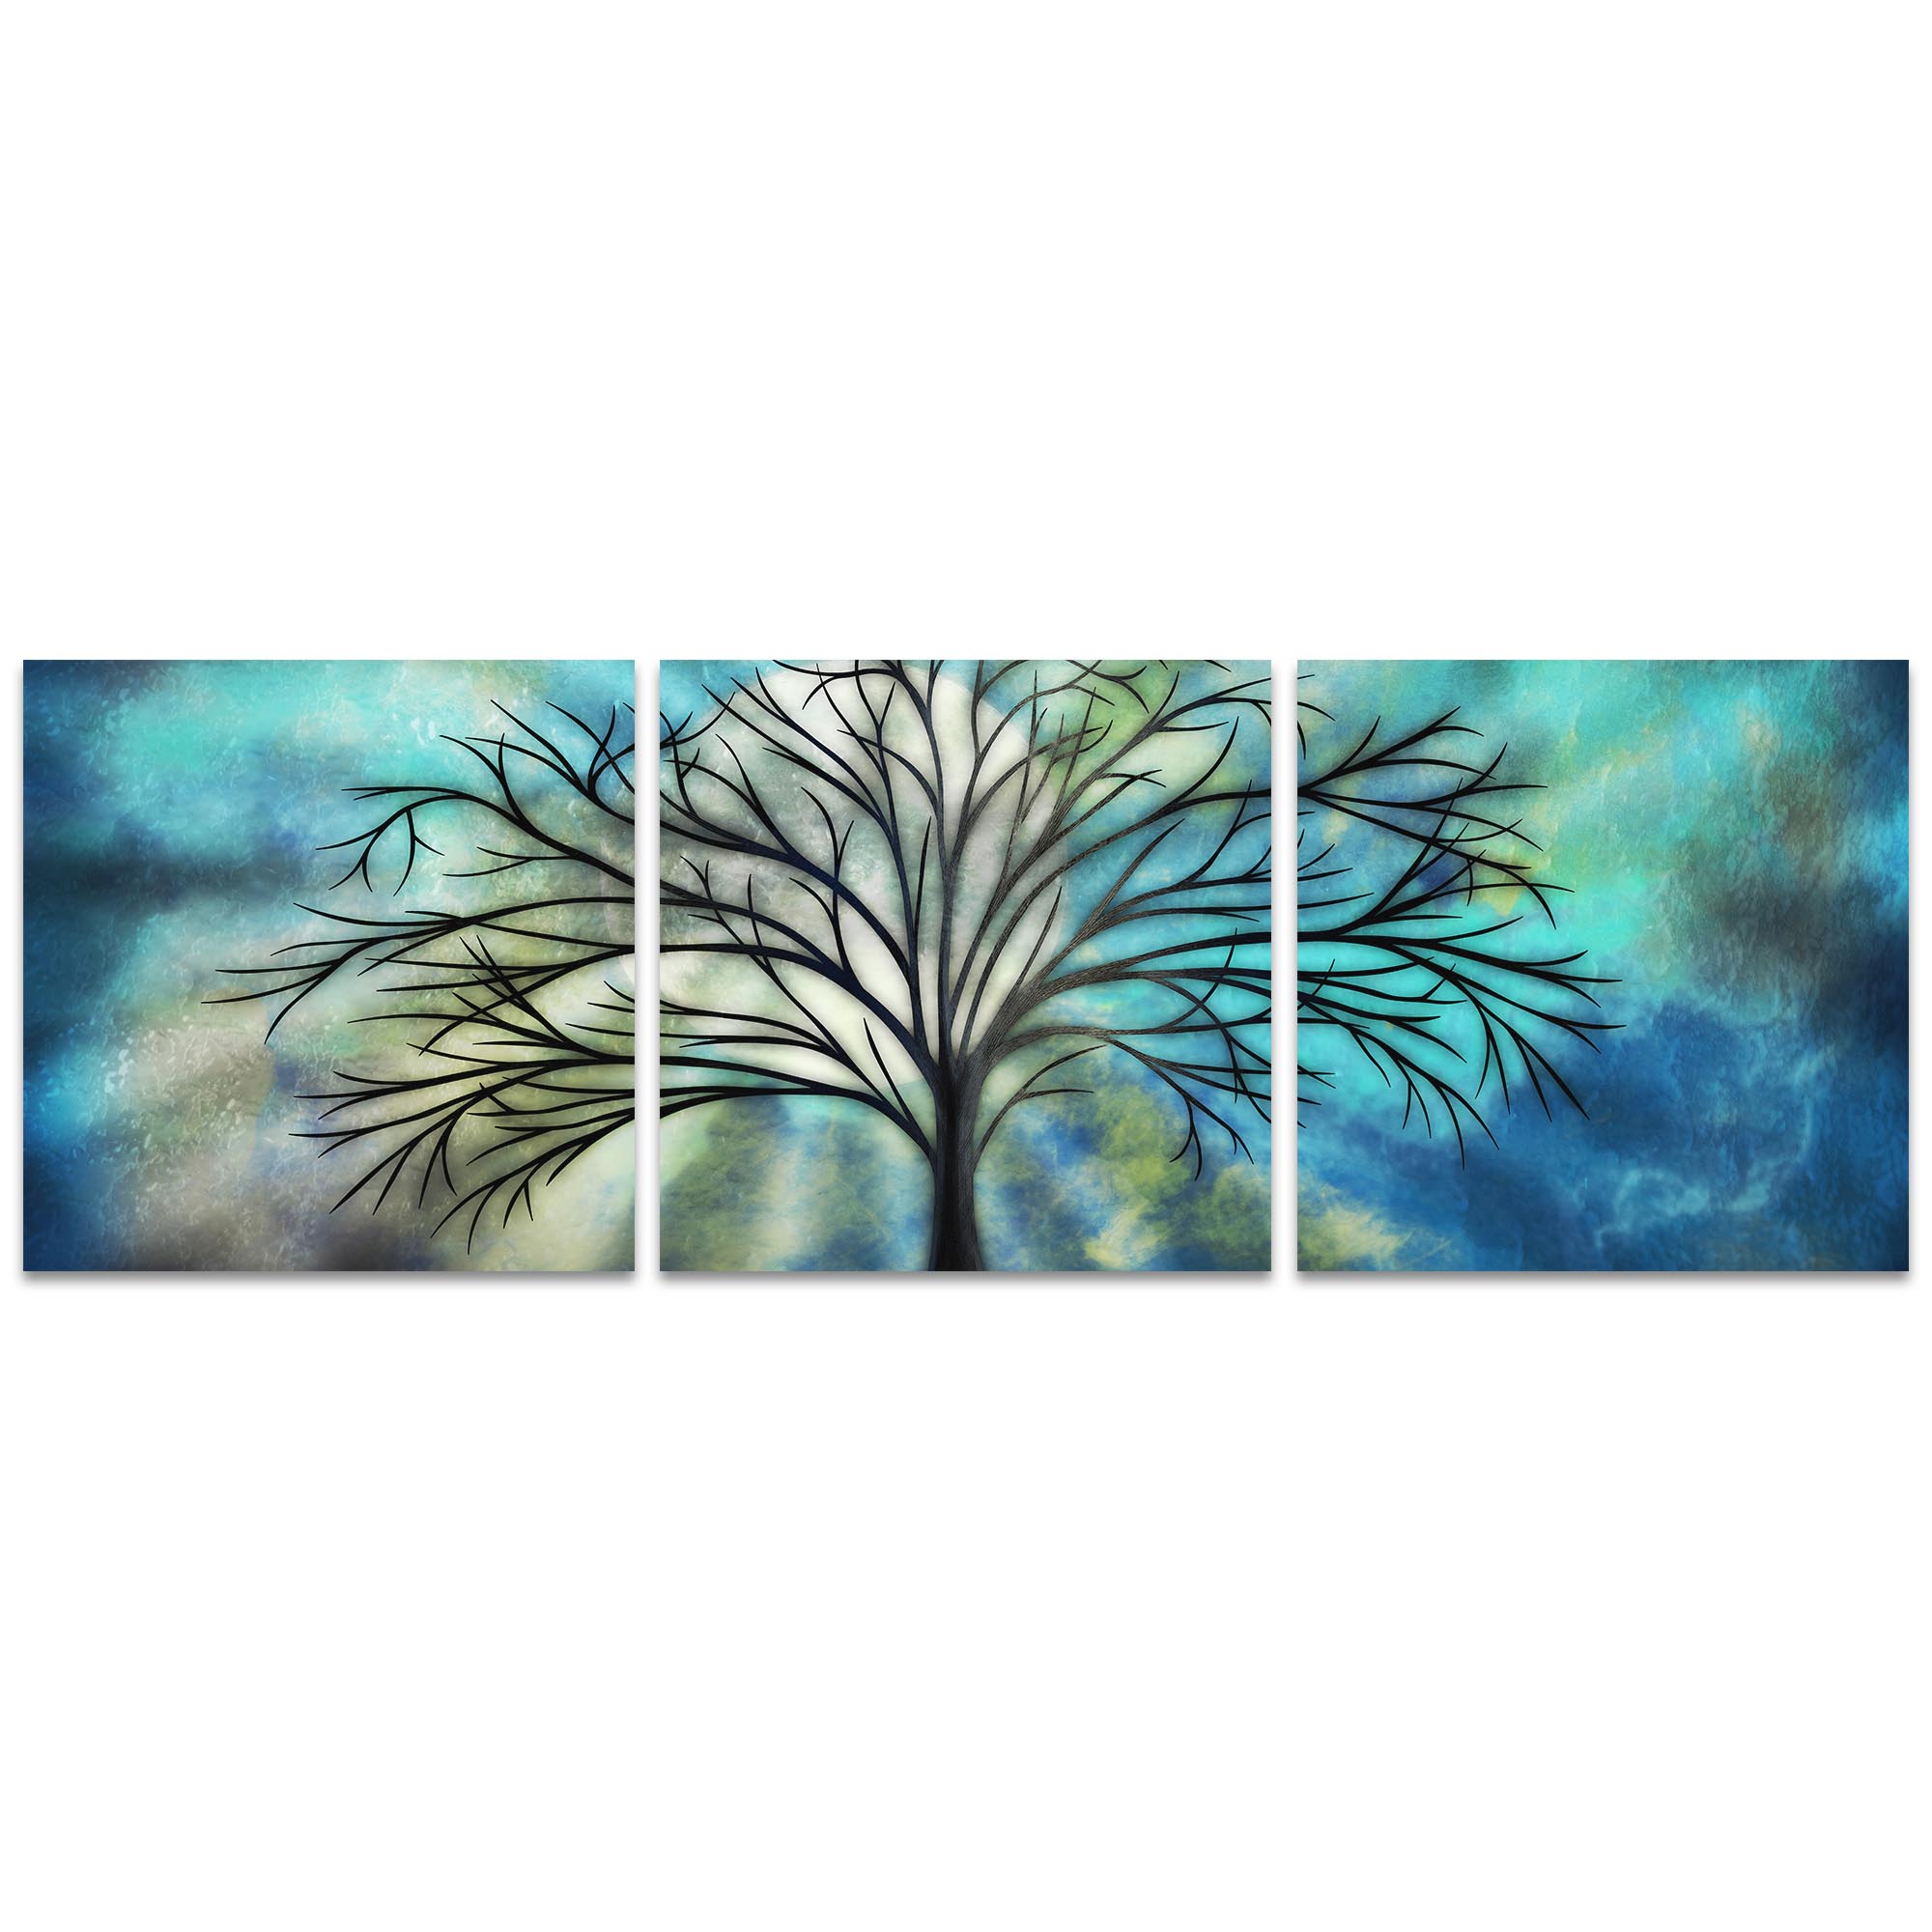 Moonlight Triptych Large 70x22in. Metal or Acrylic Fantasy Decor